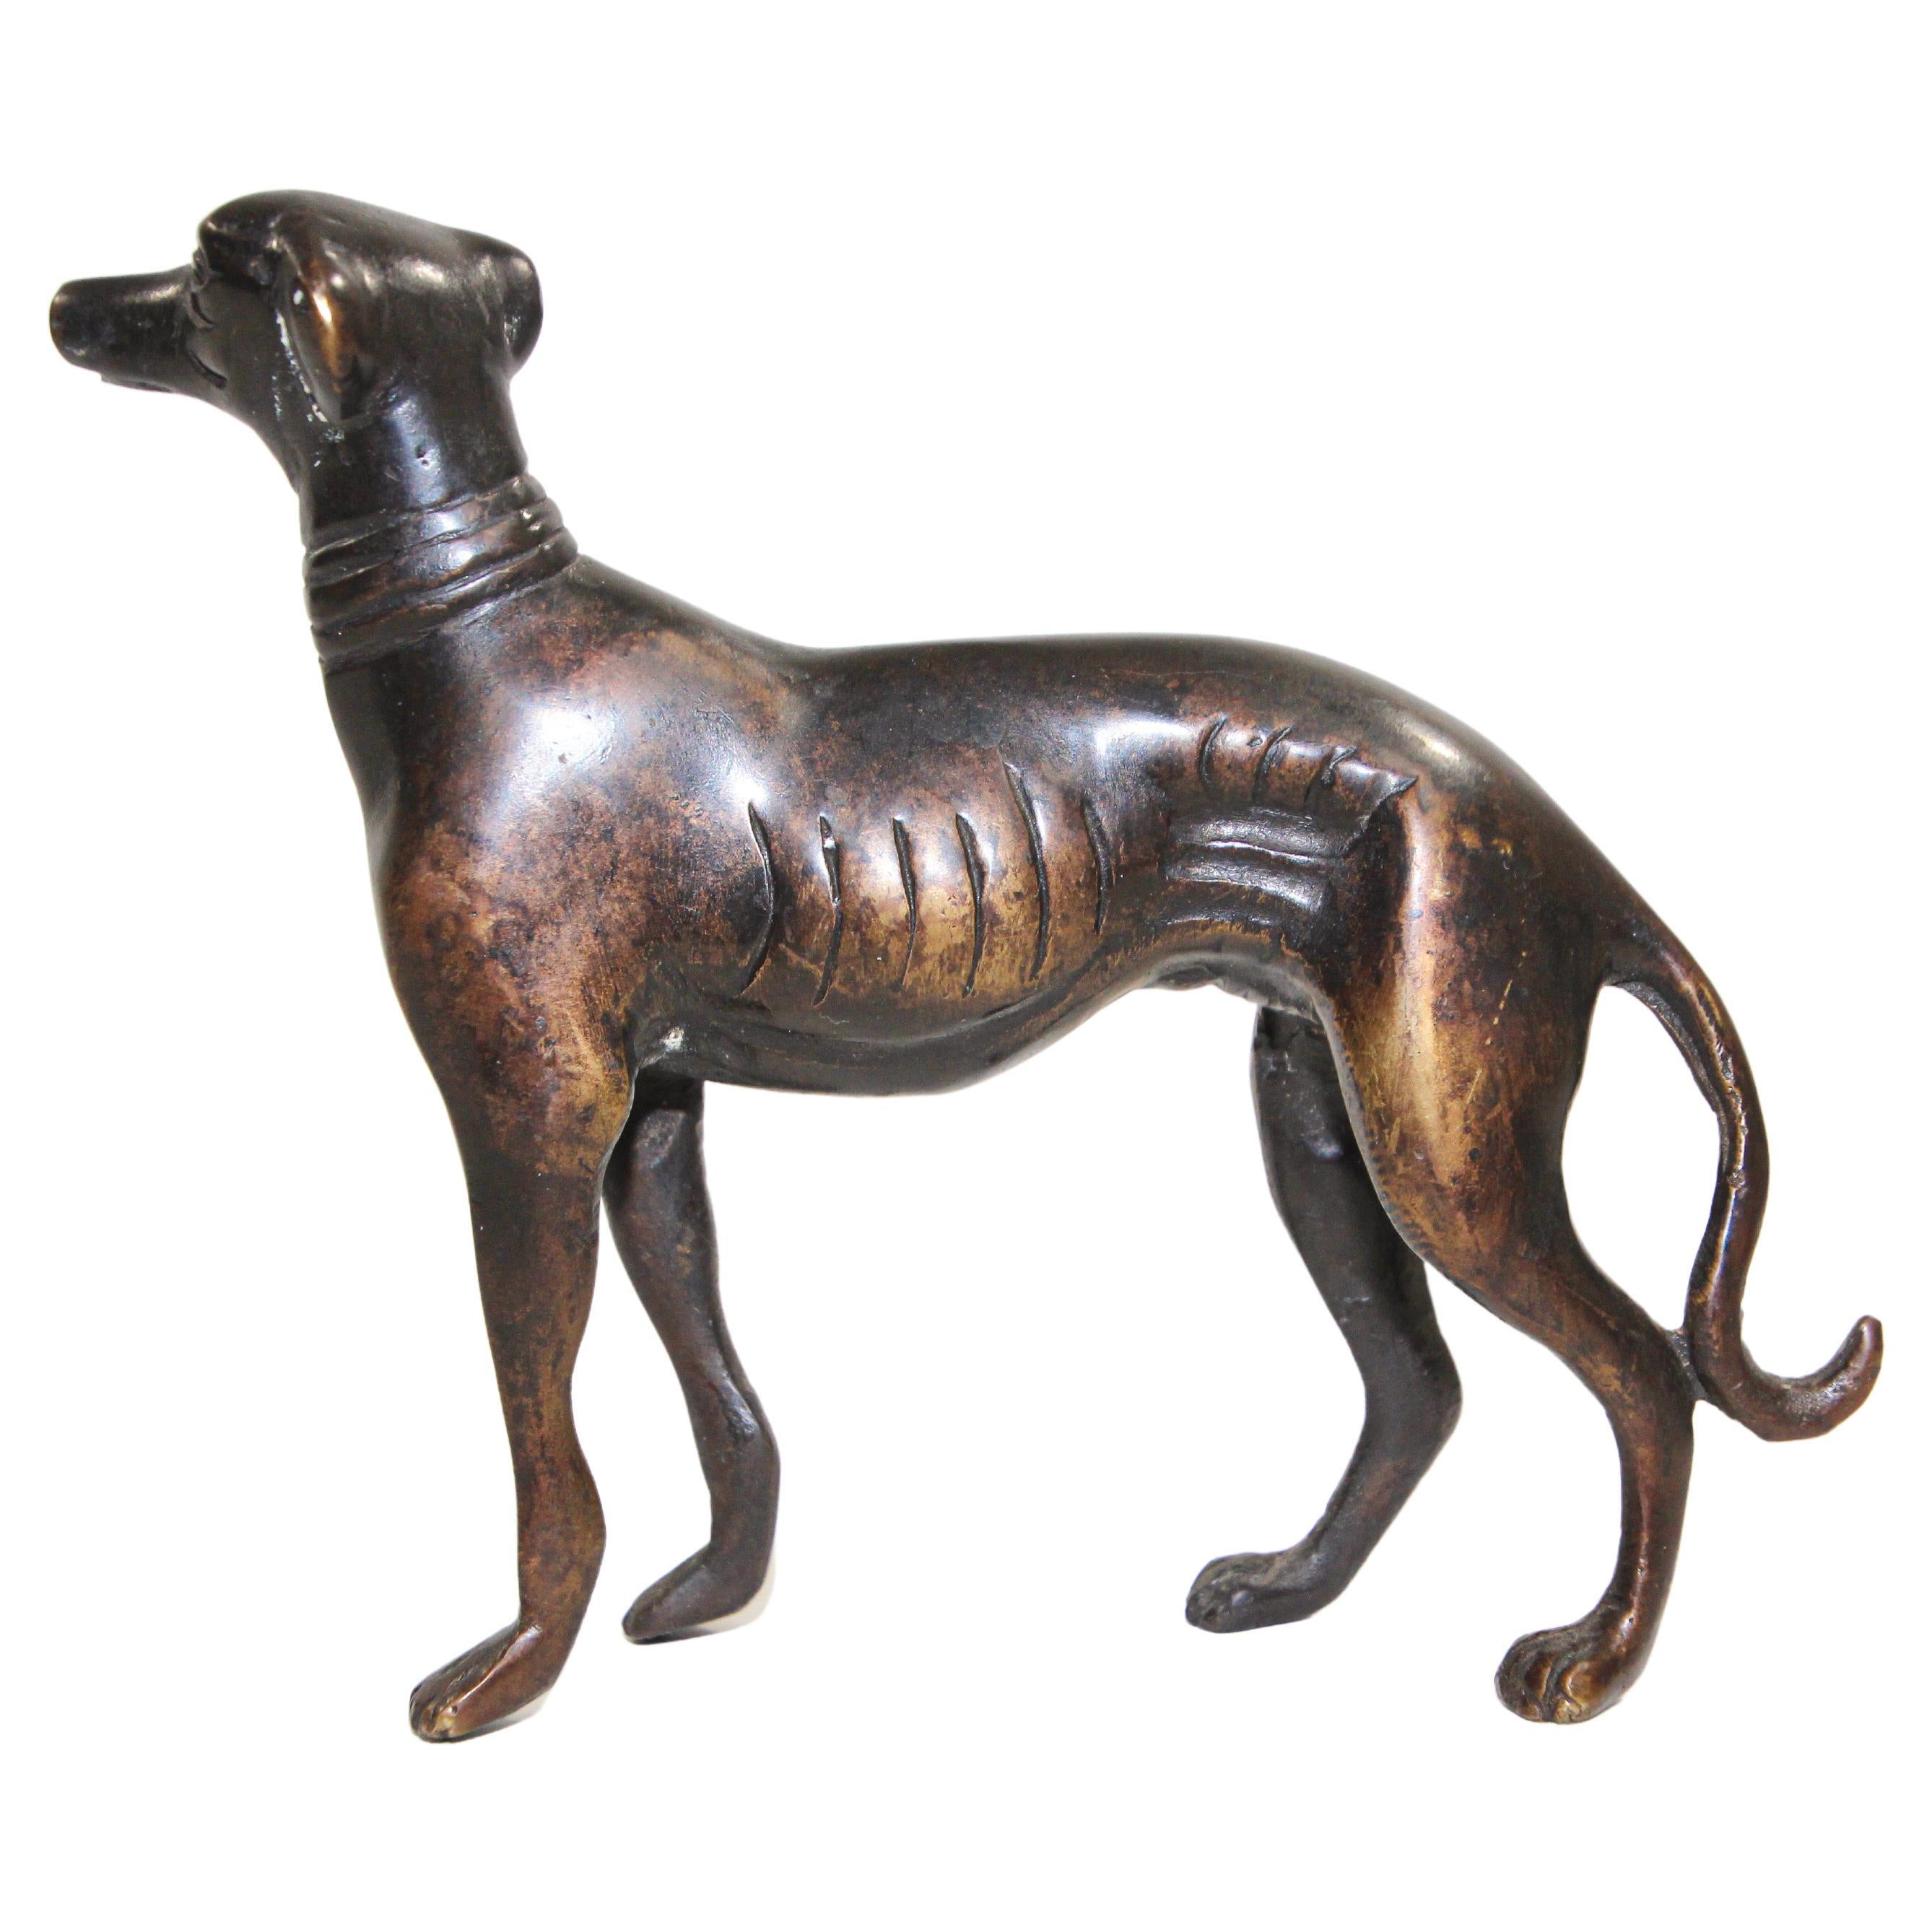 Beautiful cast metal bronze greyhound dog sculpture.
An elegant, detailed cast sculpture depicting a greyhound dog..
Sculptures depicting a greyhound dog.
Made with the fusion system cast metal in beautiful dark bronze black color.
Size: is 5.5